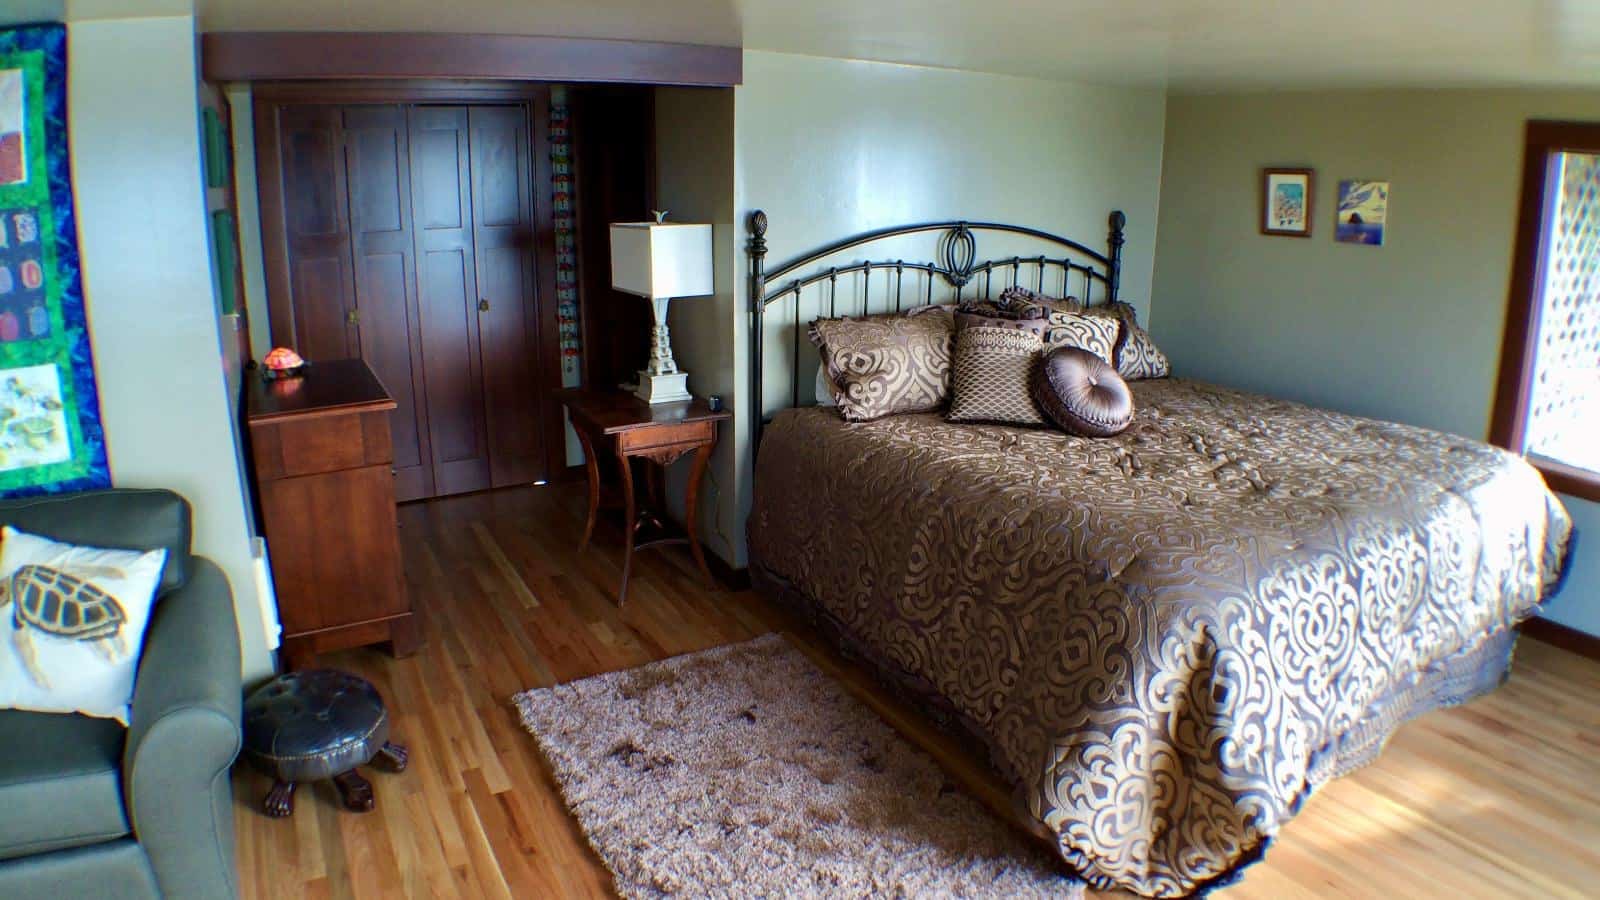 Bedroom with light green walls, hardwood flooring, wrought iron bed, brown bedding, wooden dresser, and green loveseat